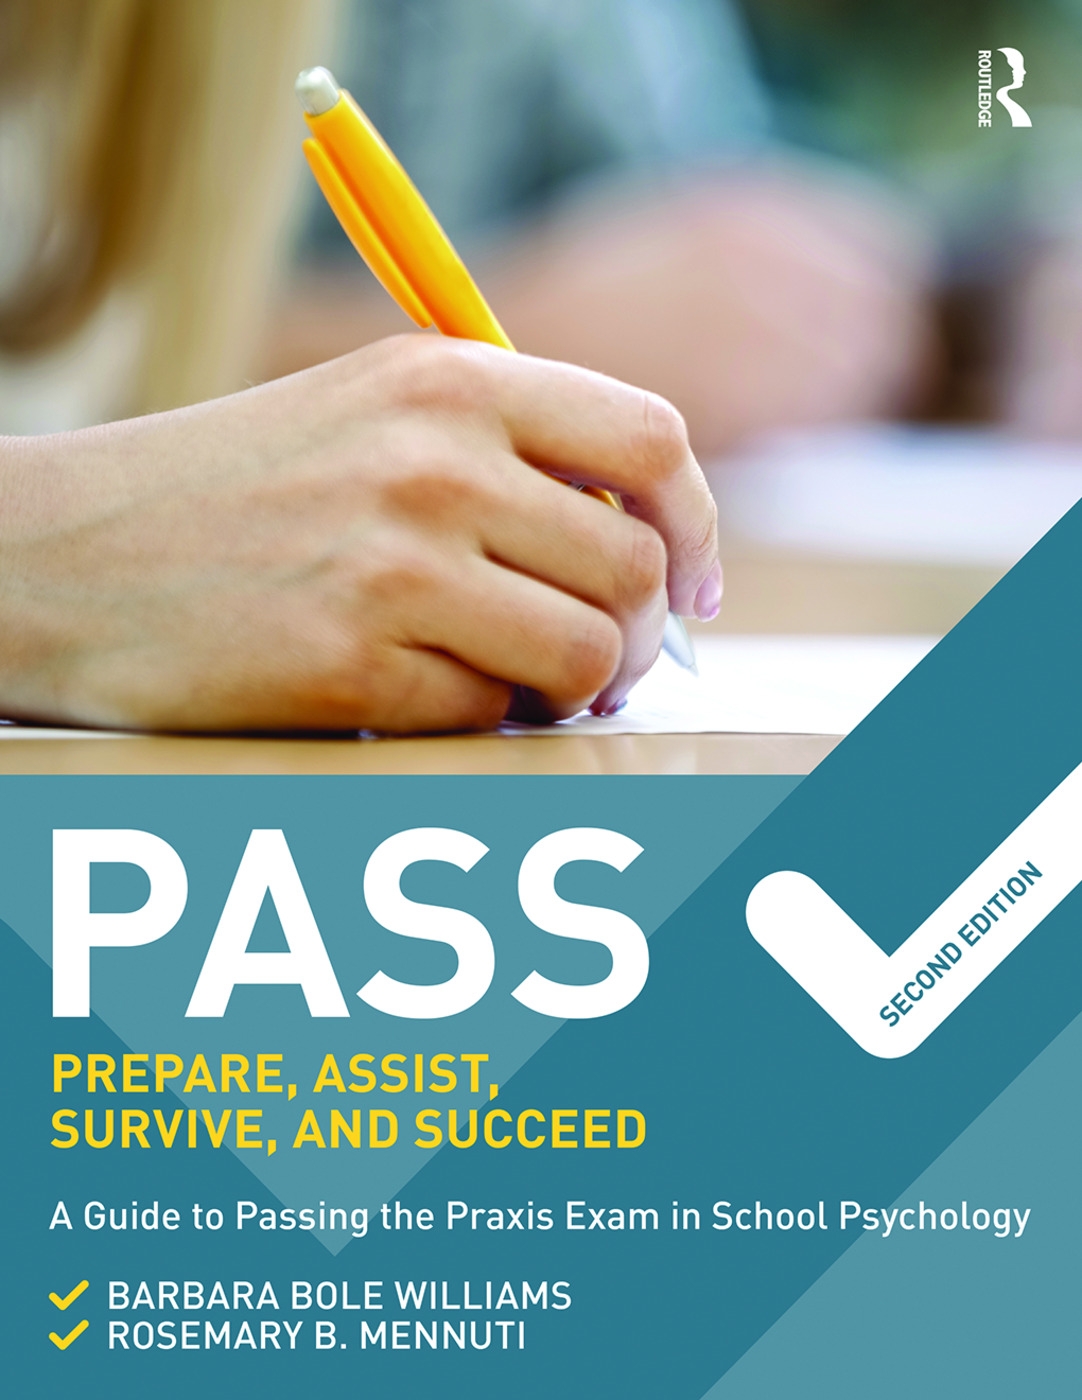 Pass: Prepare, Assist, Survive, and Succeed: A Guide to Passing the Praxis Exam in School Psychology, 2nd Edition